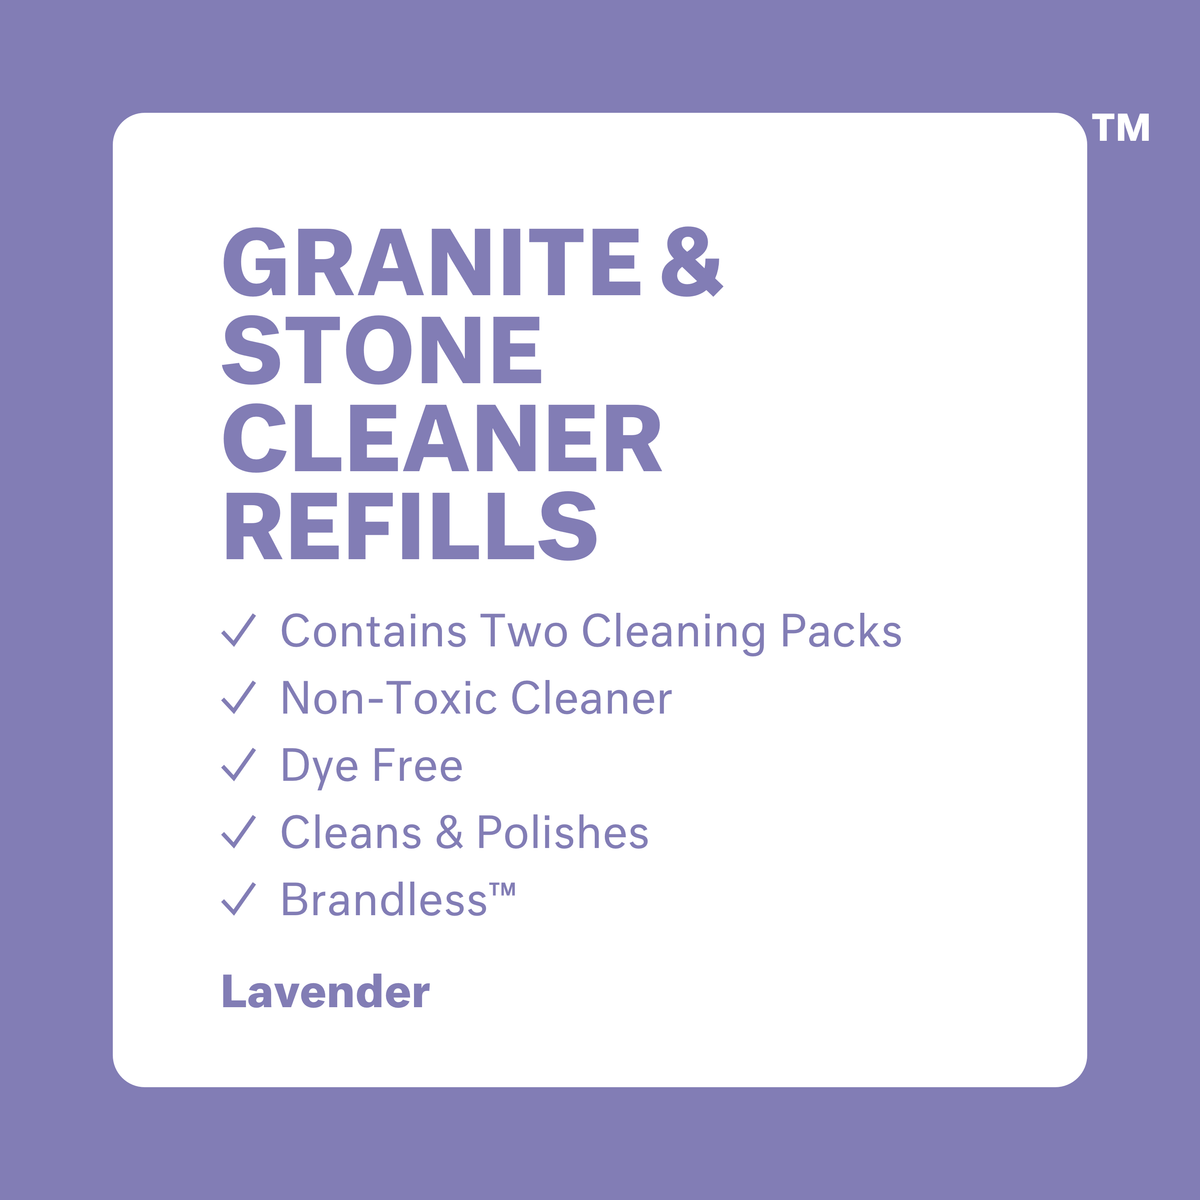 Granite and Stone Cleaner Refills, 2 Pack, Lavender. Includes two cleaning packs. Non-toxic cleaners. Dye free. Cleans and Polishes. Brandless.